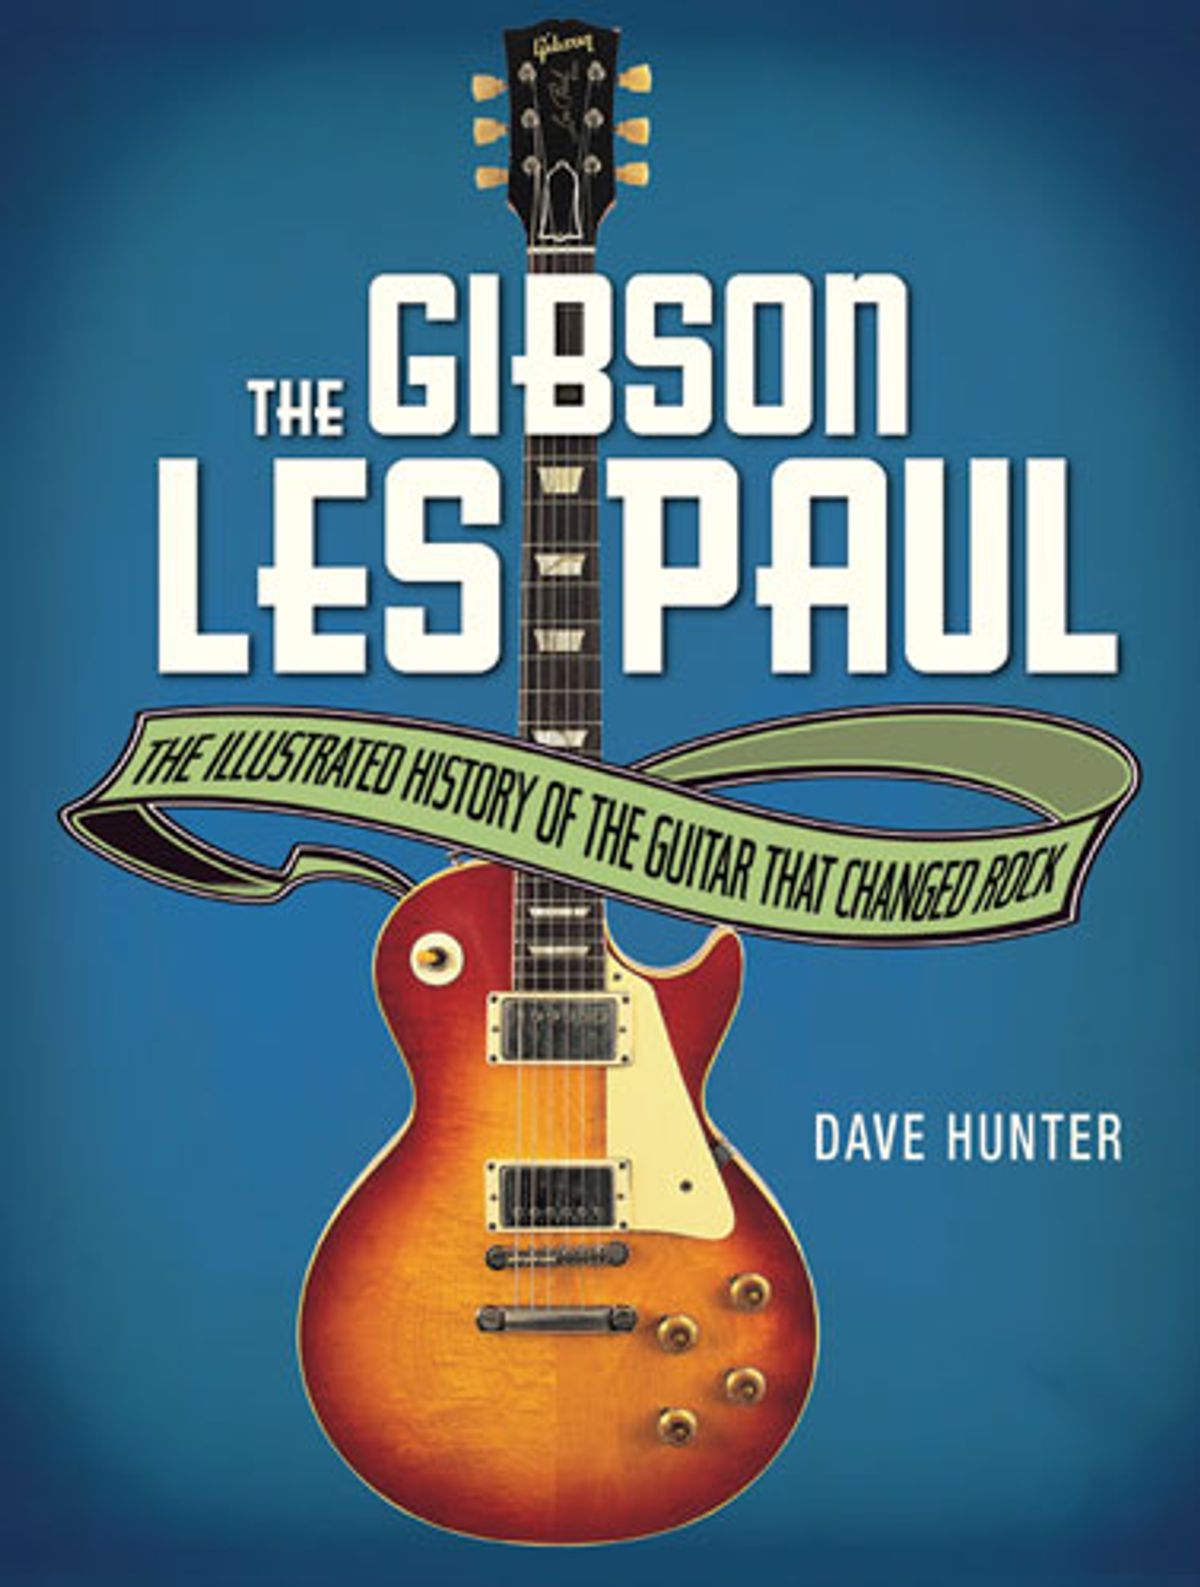 Voyageur Press Publishes "The Gibson Les Paul: The Illustrated History of the Guitar That Changed Rock"